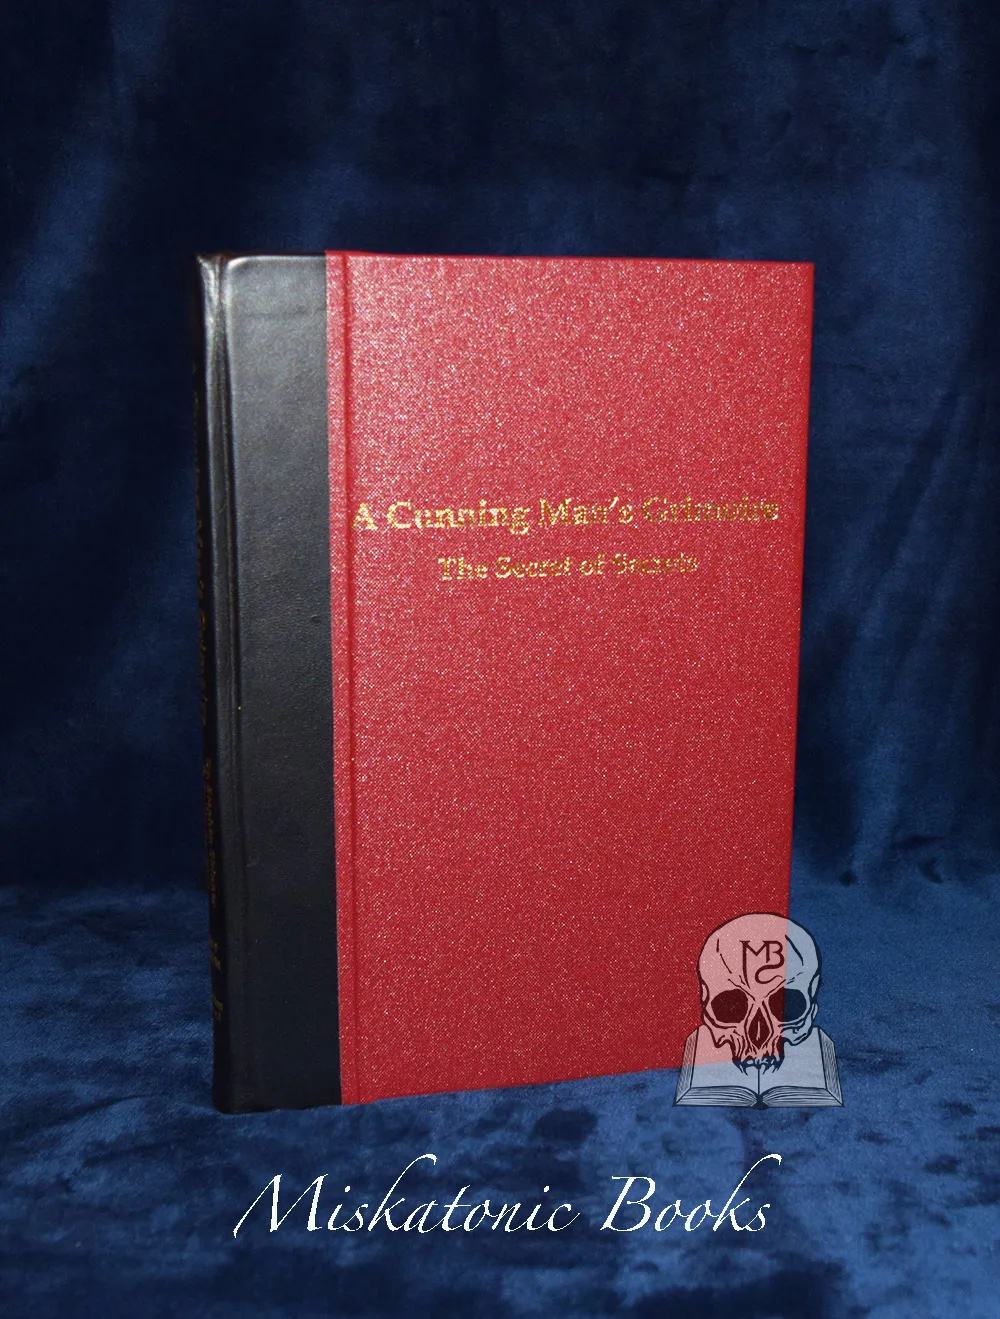 A CUNNING MAN'S GRIMOIRE by Dr. Stephen Skinner & David Rankine - Deluxe, Signed, Quarter Bound in Leather Limited Edition